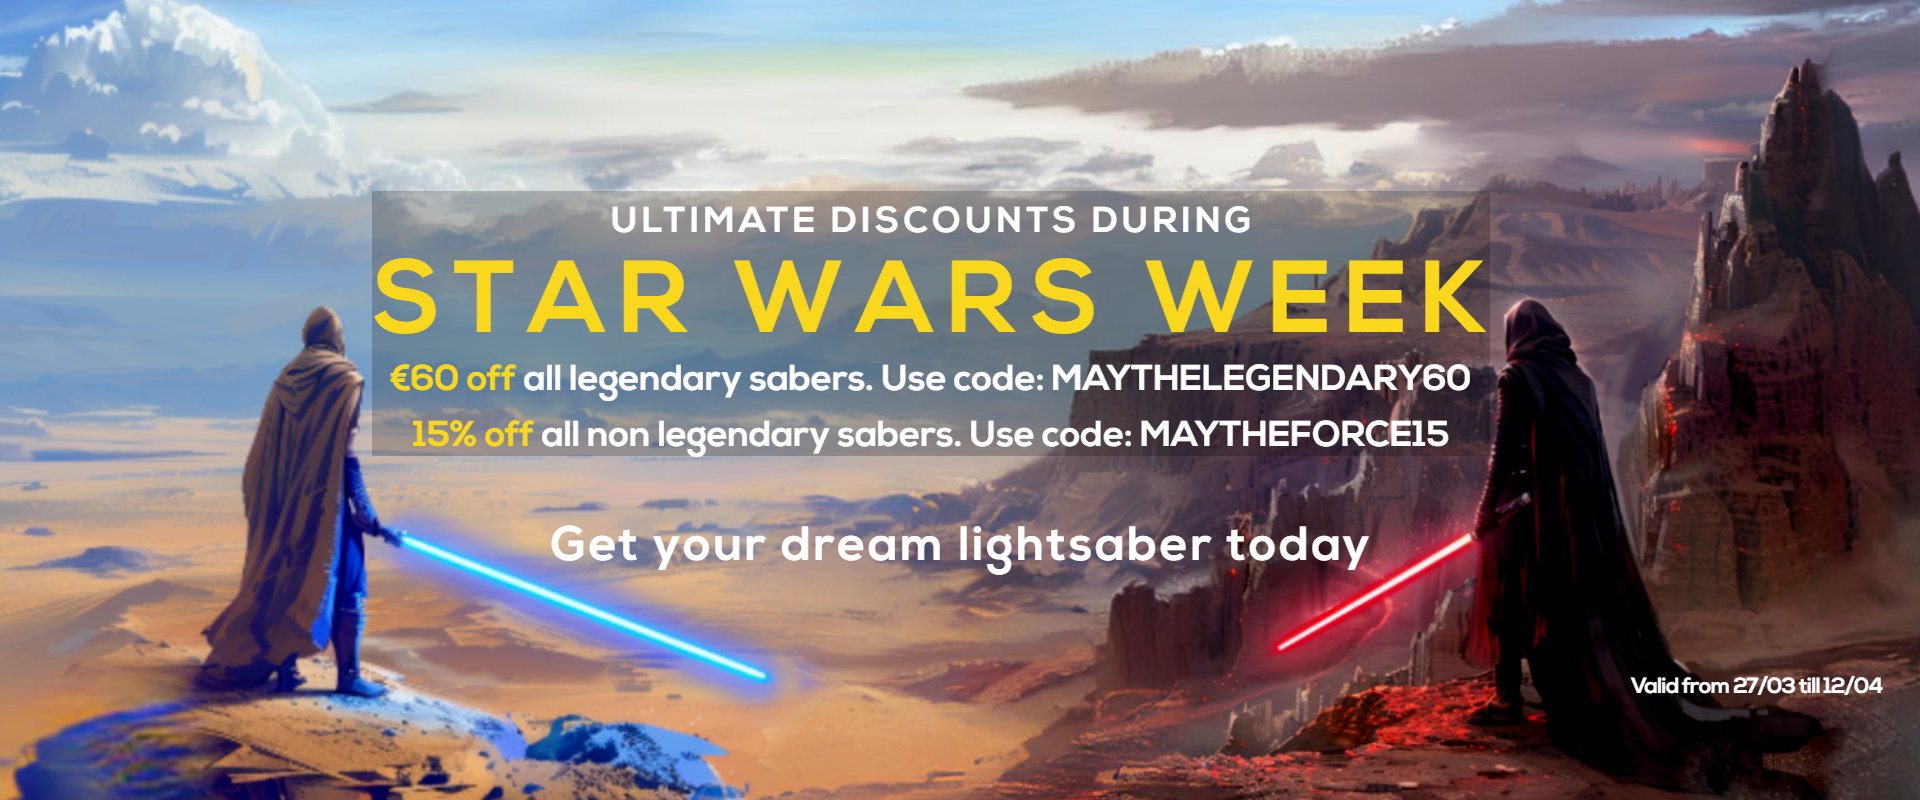 Star Wars week may the 4th discount coupon code for lightsabers